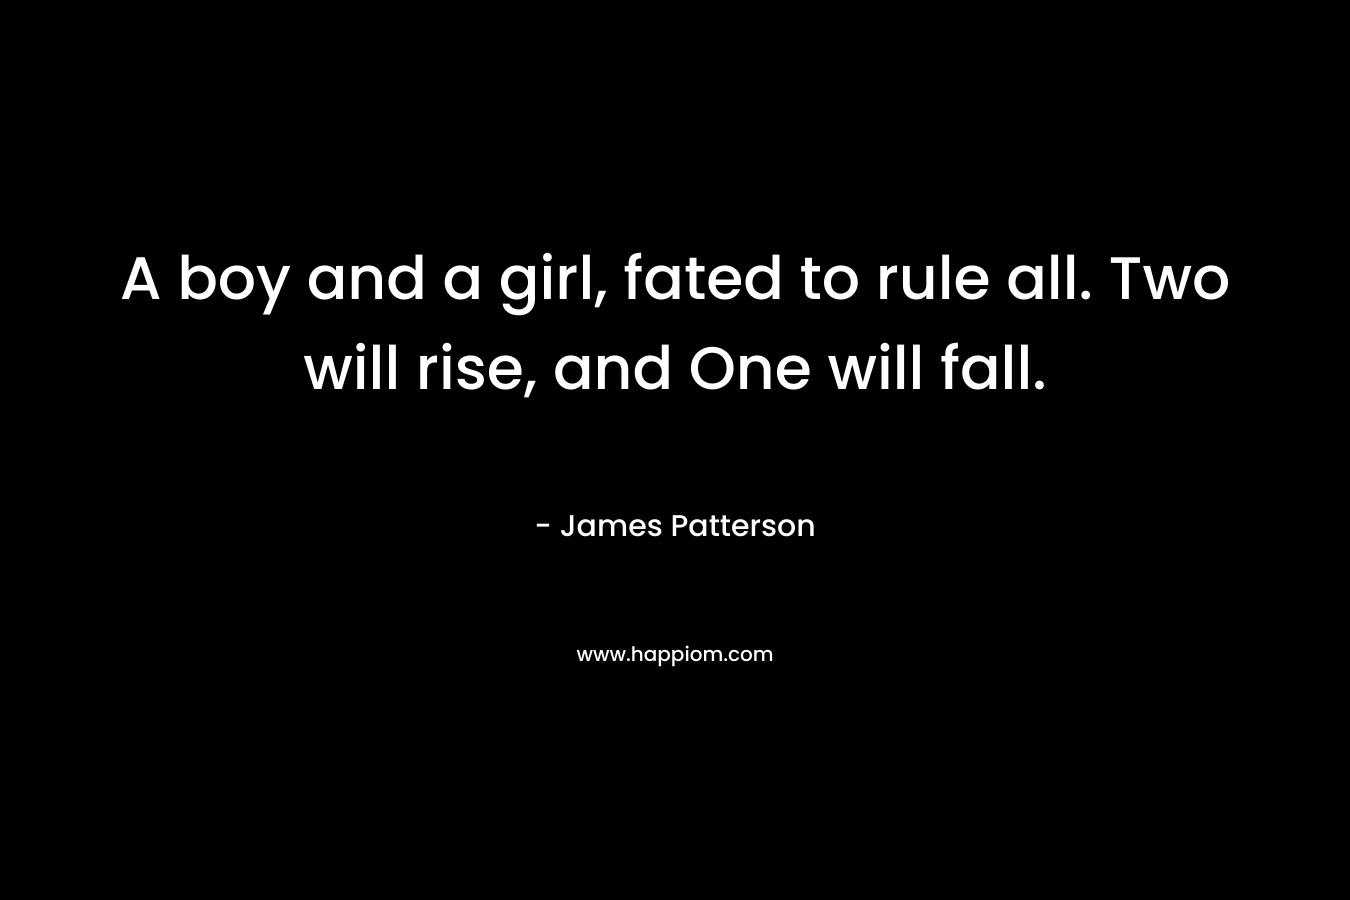 A boy and a girl, fated to rule all. Two will rise, and One will fall.